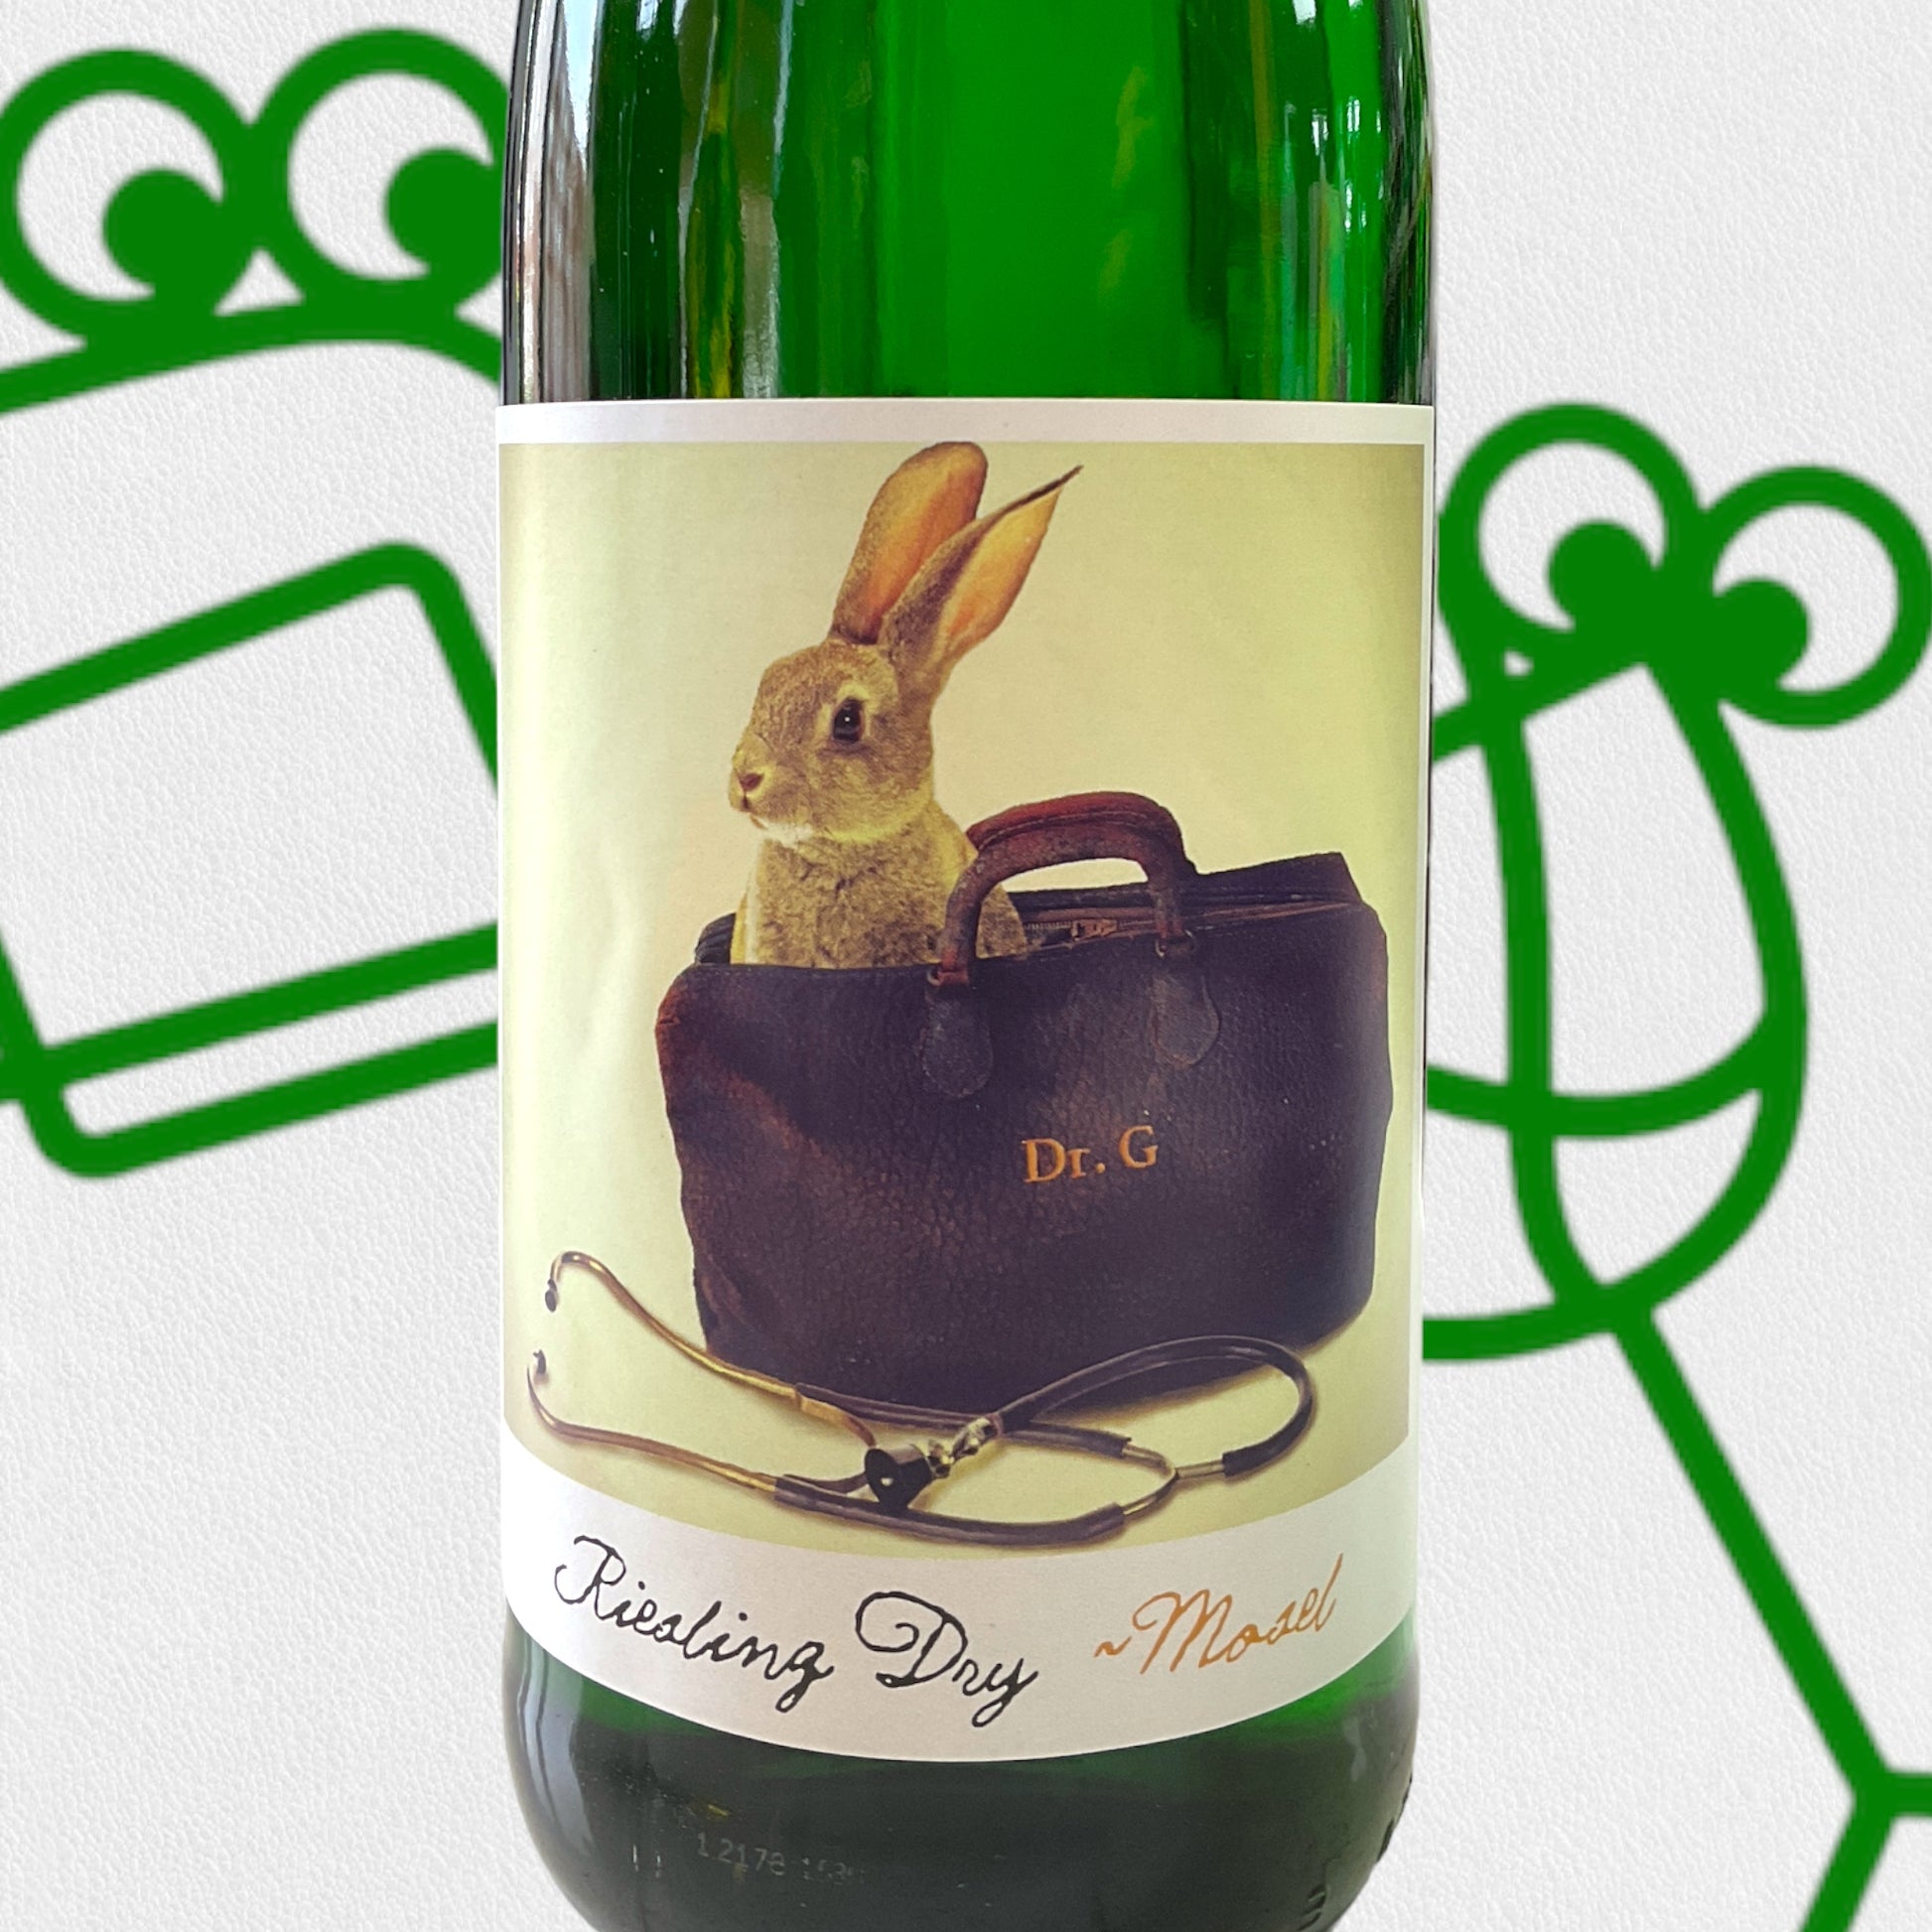 Dr. G Riesling 'Dry' Mosel, Germany - Williston Park Wines & Spirits